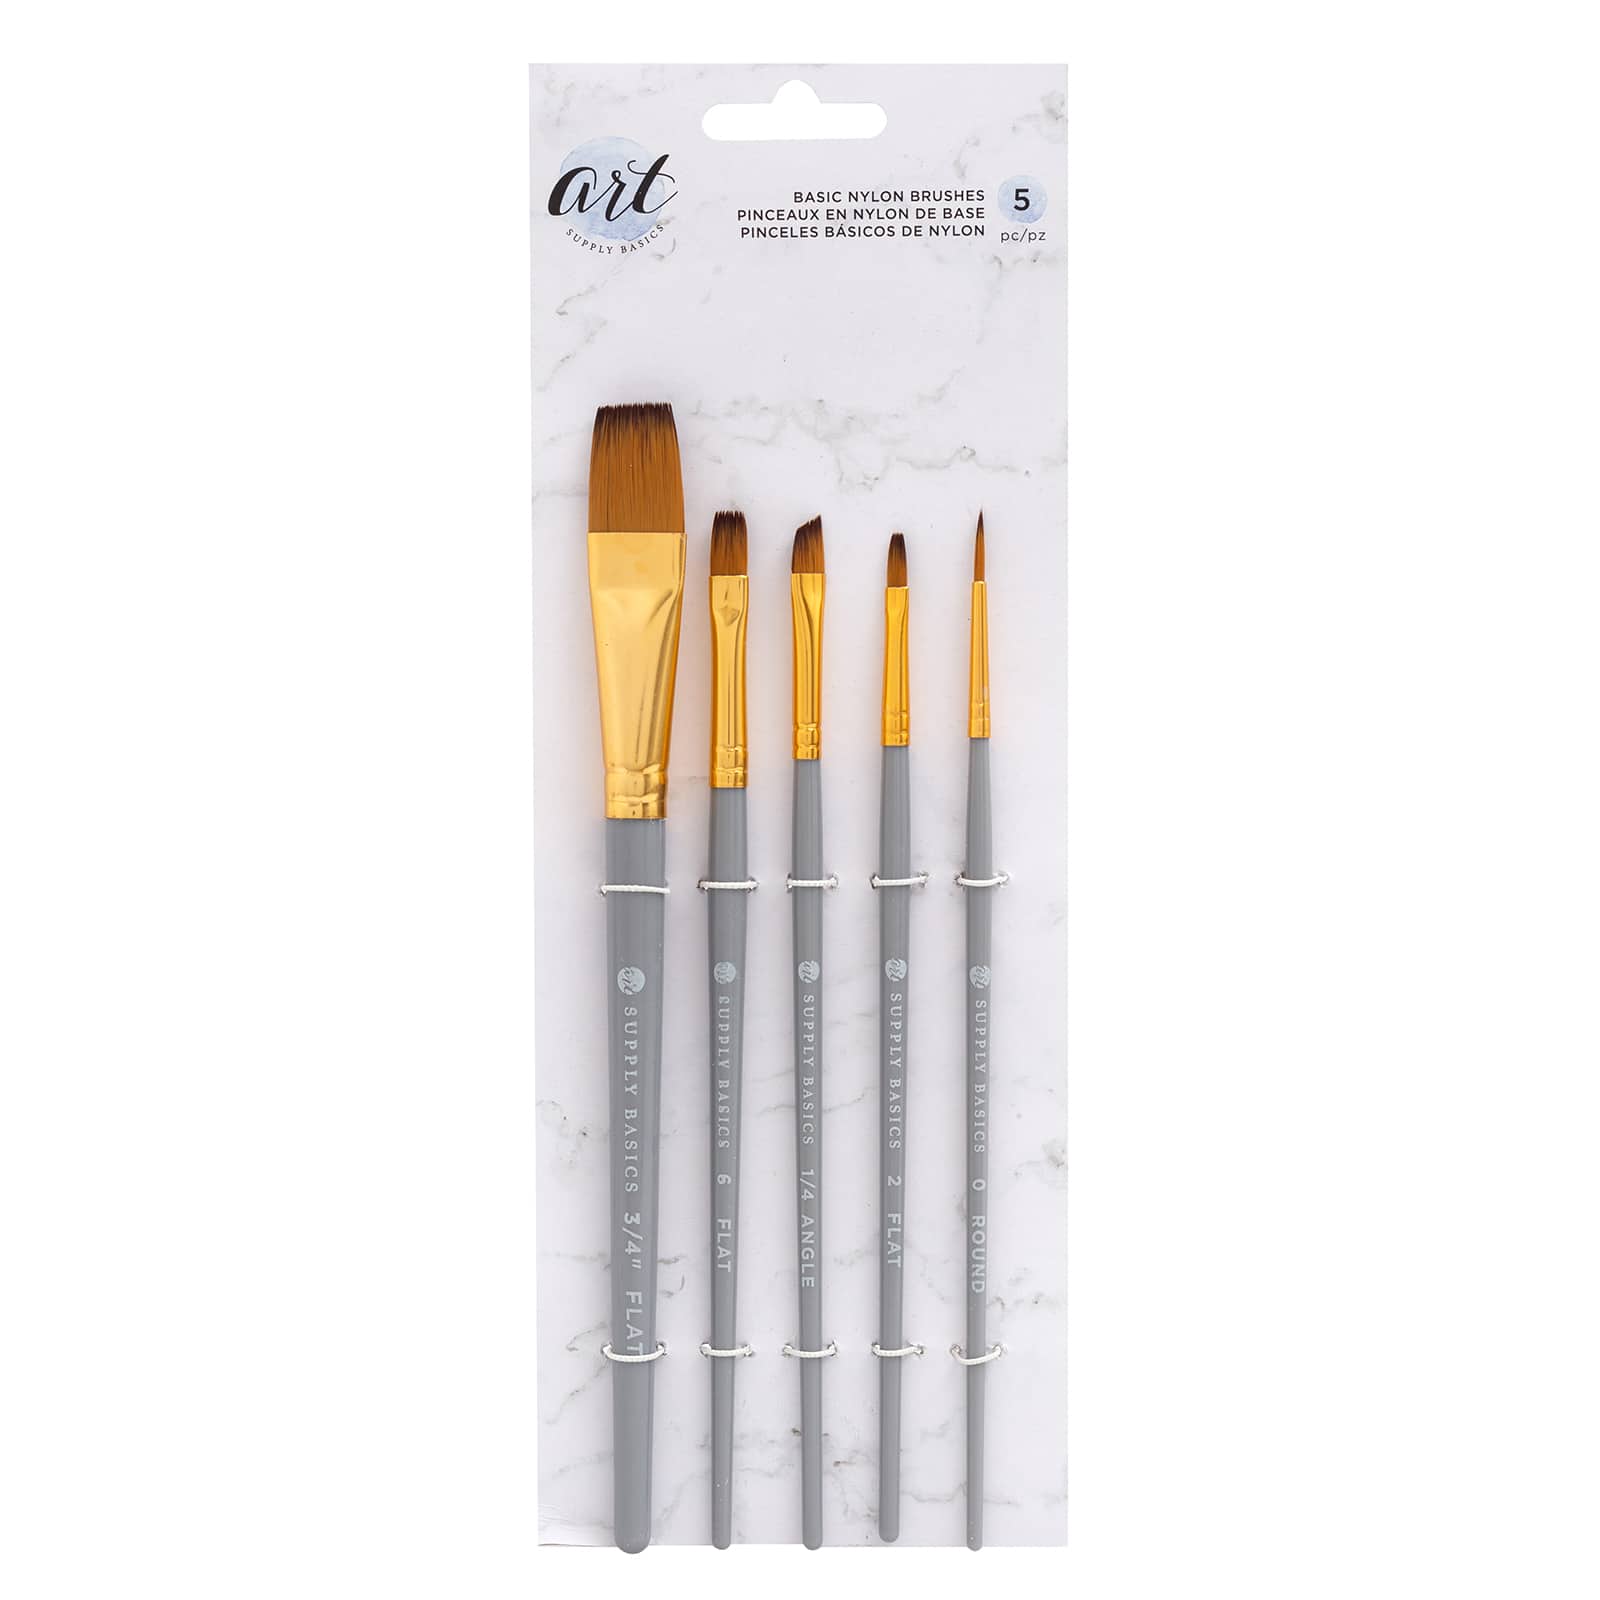 5 Pack of 3 Wide Disposable Throw Away Paint Brushes